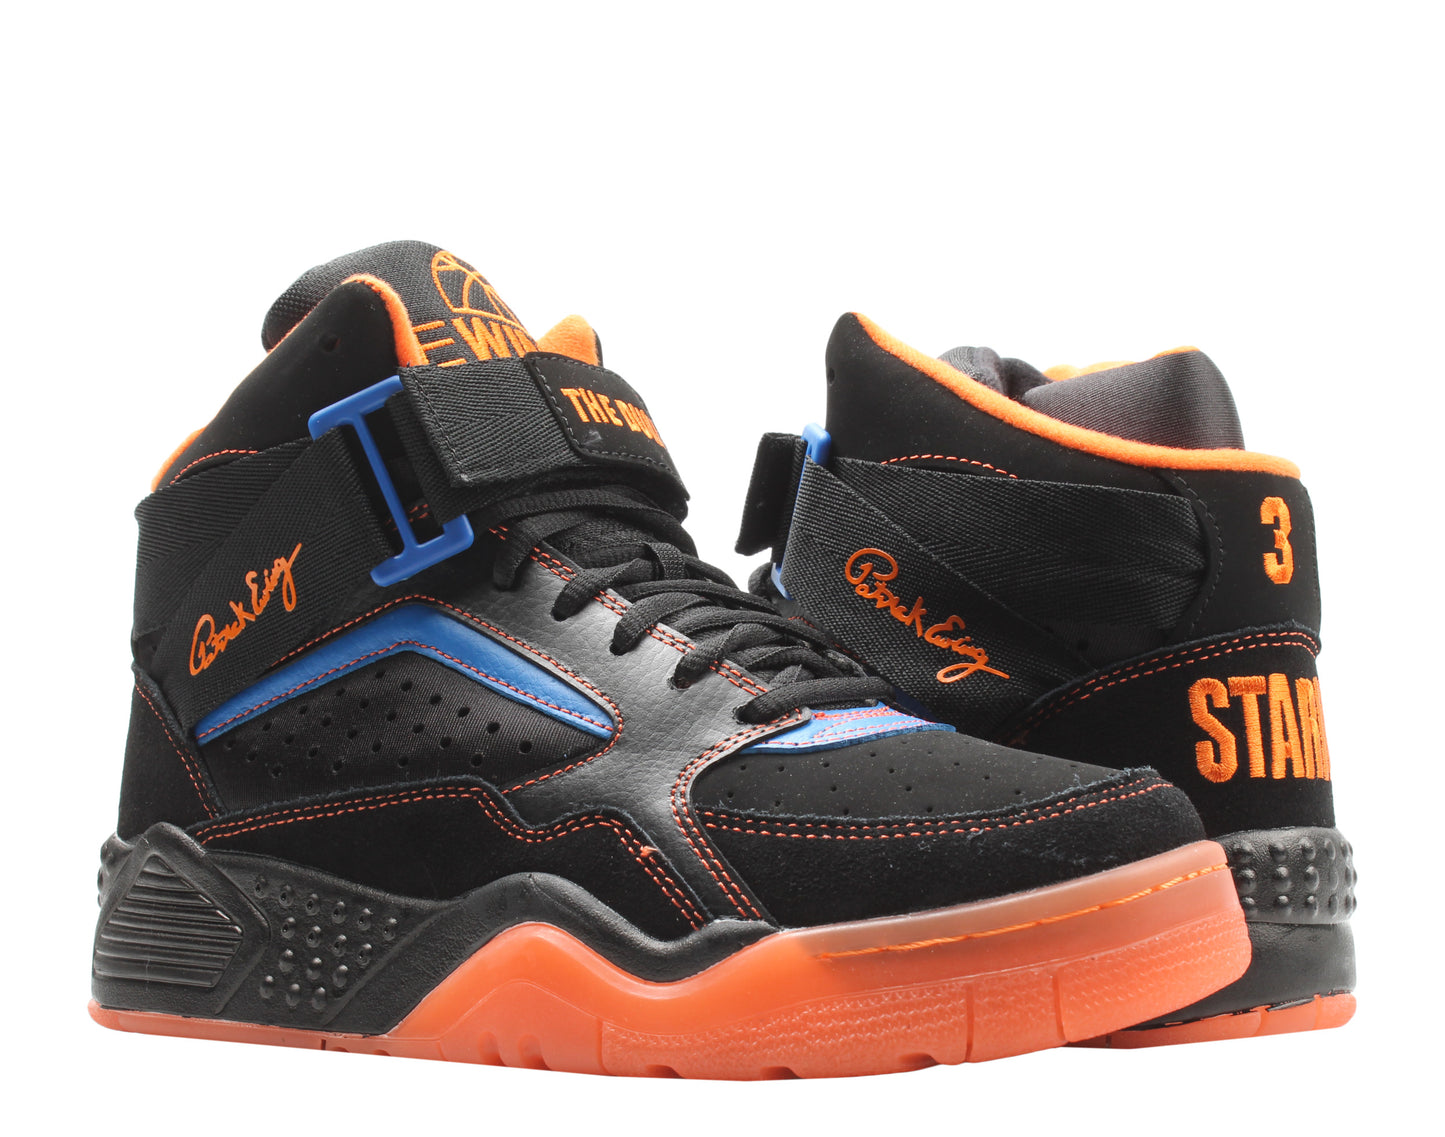 Ewing Athletics Goes Way Up on John Starks Inspired “The Dunk” Focus